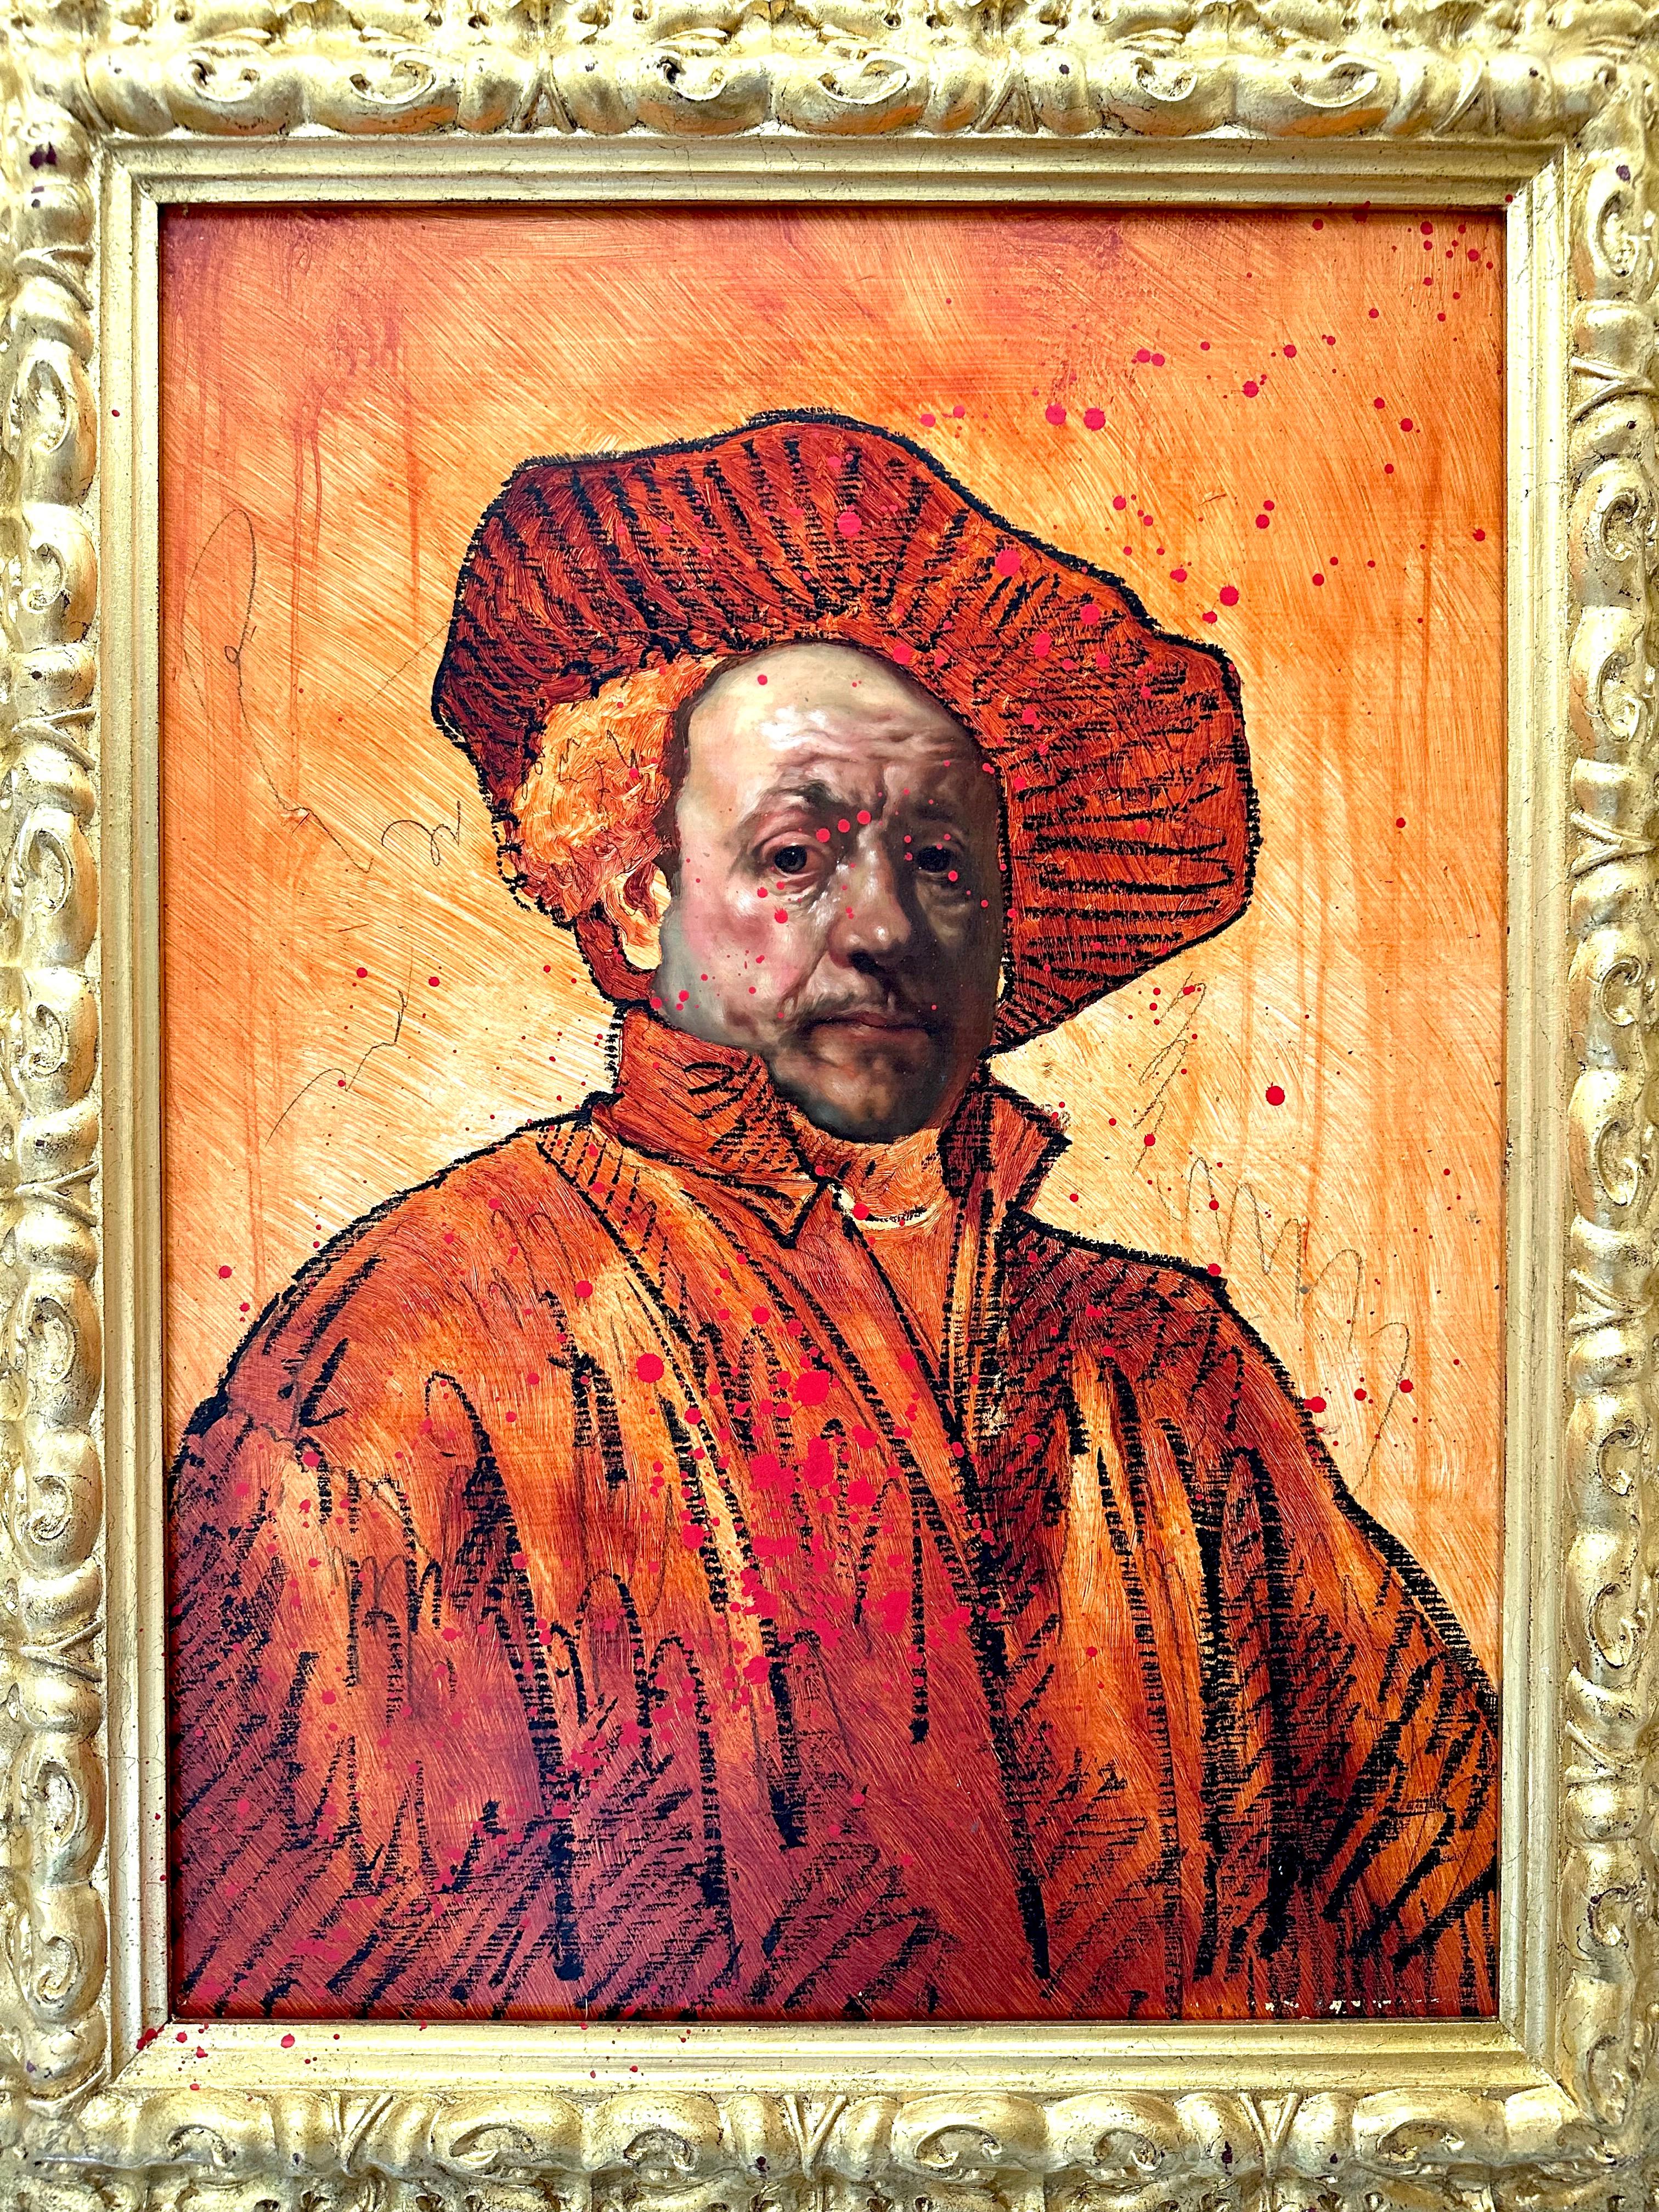 "Rembrandt El Chingon" Painting (FRAMED) 23" x 17" inch by Isaac Pelayo

Medium: Oil, oil stick, and aerosol on wood 
Comes in antique frame (wood & gold leaf)
Size framed: 29.5" x 23.5" inch

ABOUT THE ARTIST: 

Isaac Pelayo is a head on crash